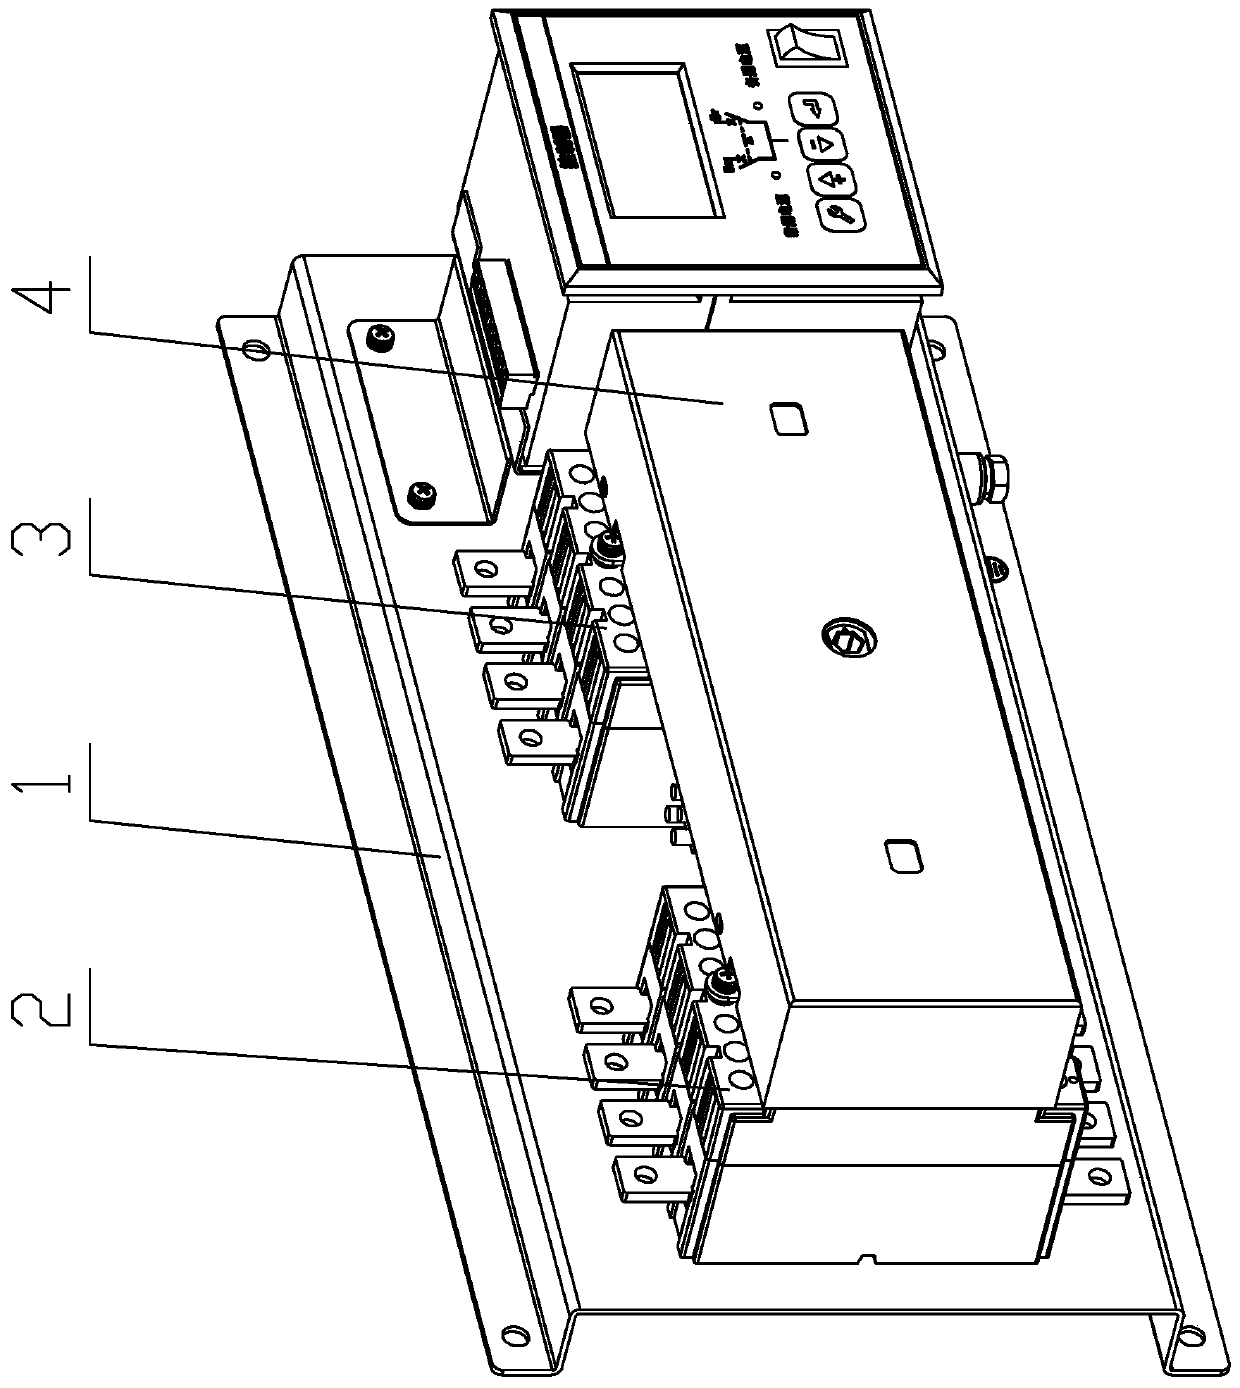 An automatic transfer switch appliance with re-buckle function